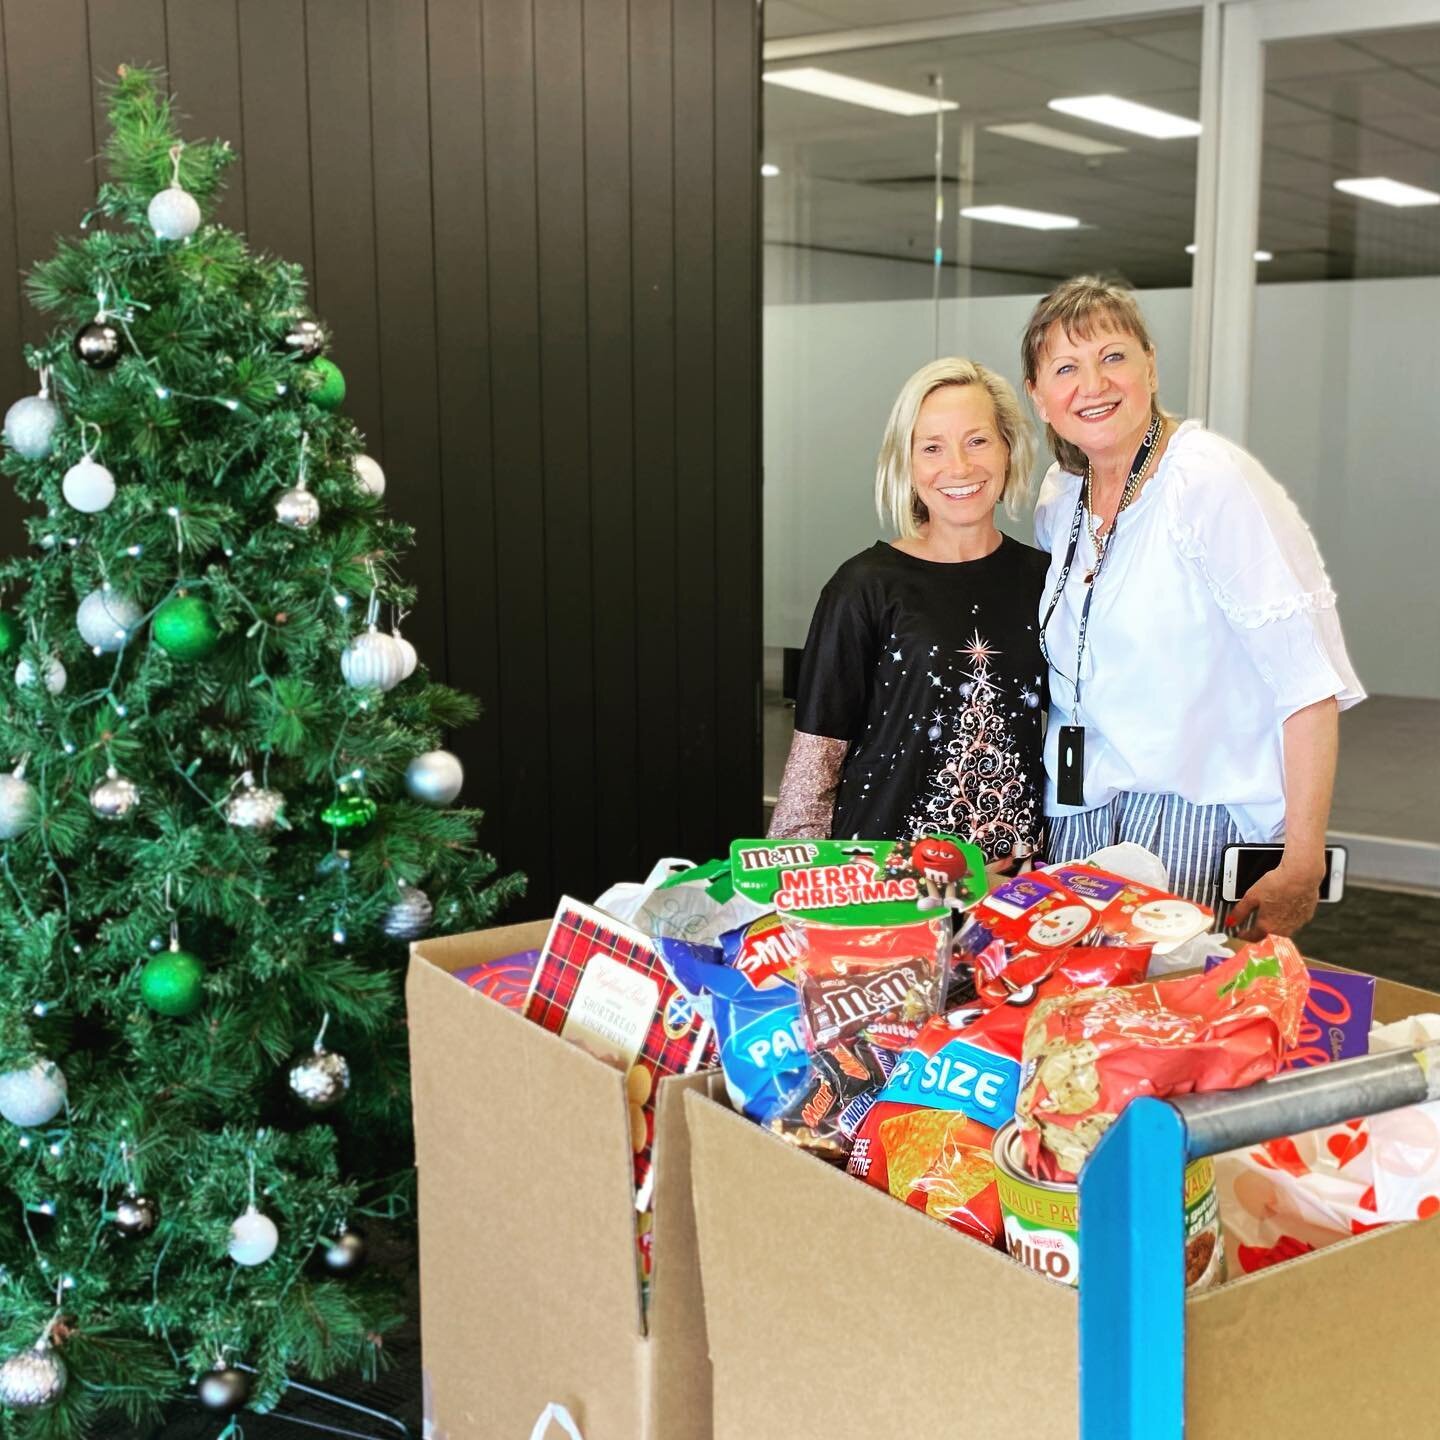 Santa came from Cablex at Virginia Park this week and delivered a mountain of goodies! Thank- you to employees and staff at Cablex who donate generously and faithfully every year to our Christmas Appeal! Definitely on the Nice List! 
#cablex
#virgini